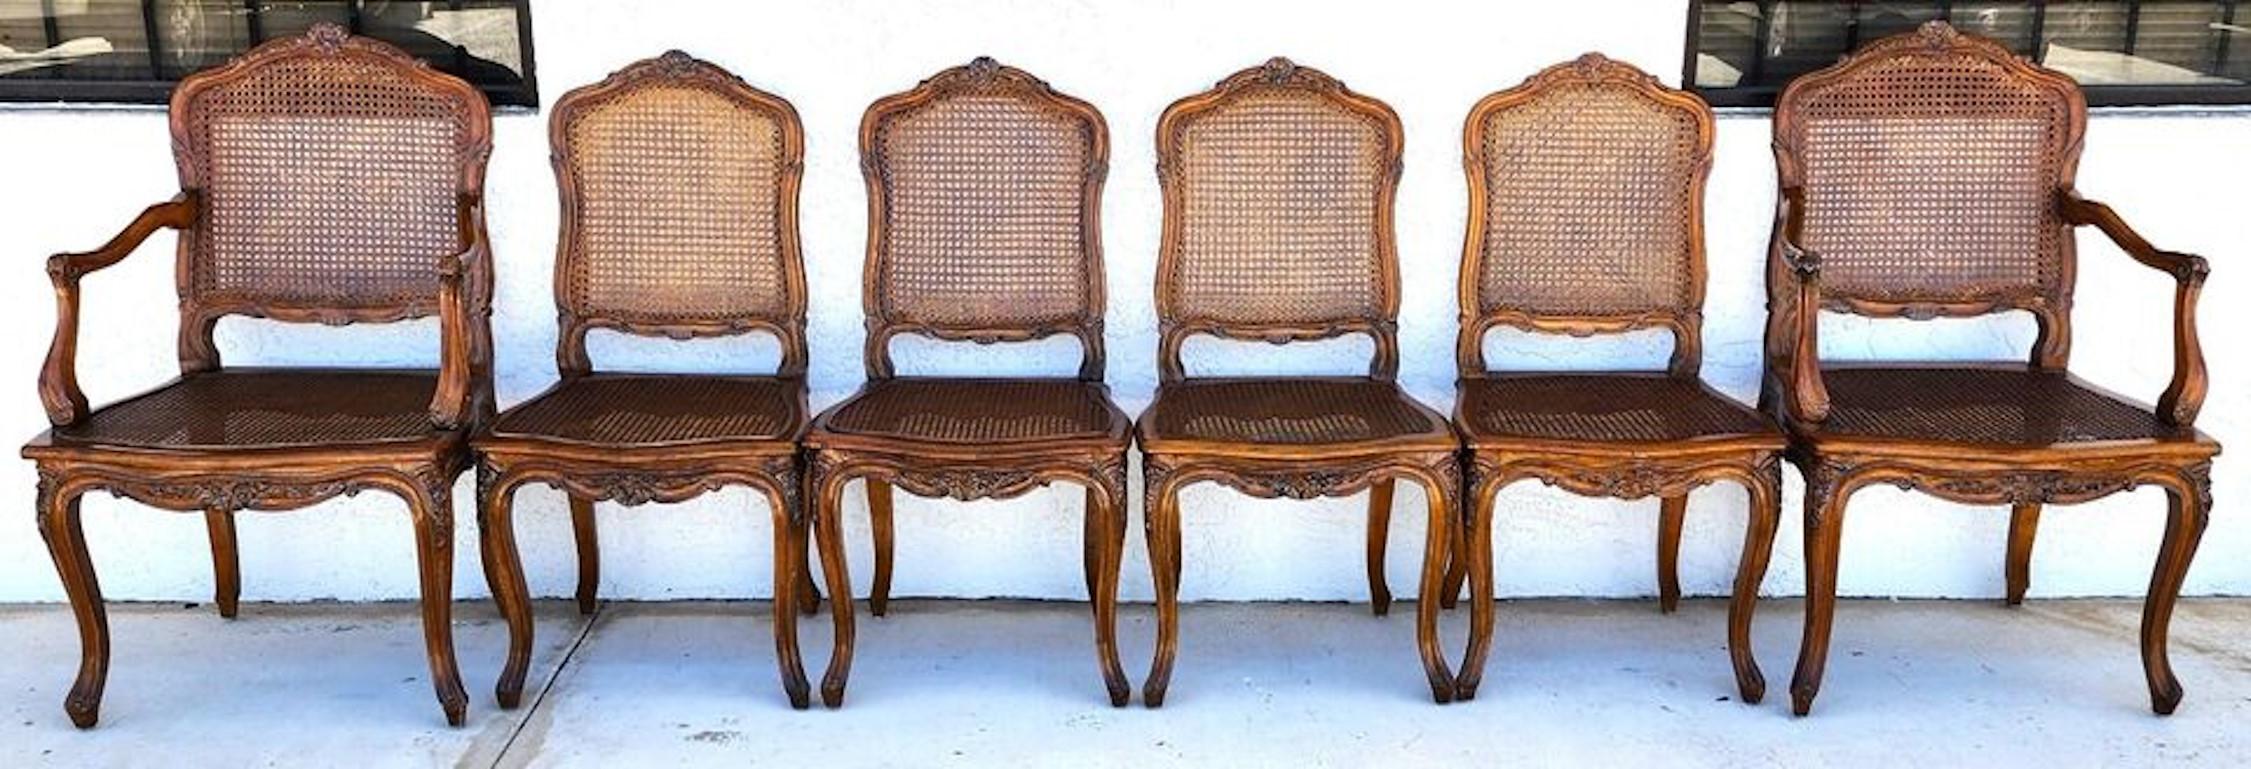 Louis XV Caned Dining Chairs Antique Set of 6 In Good Condition For Sale In Lake Worth, FL